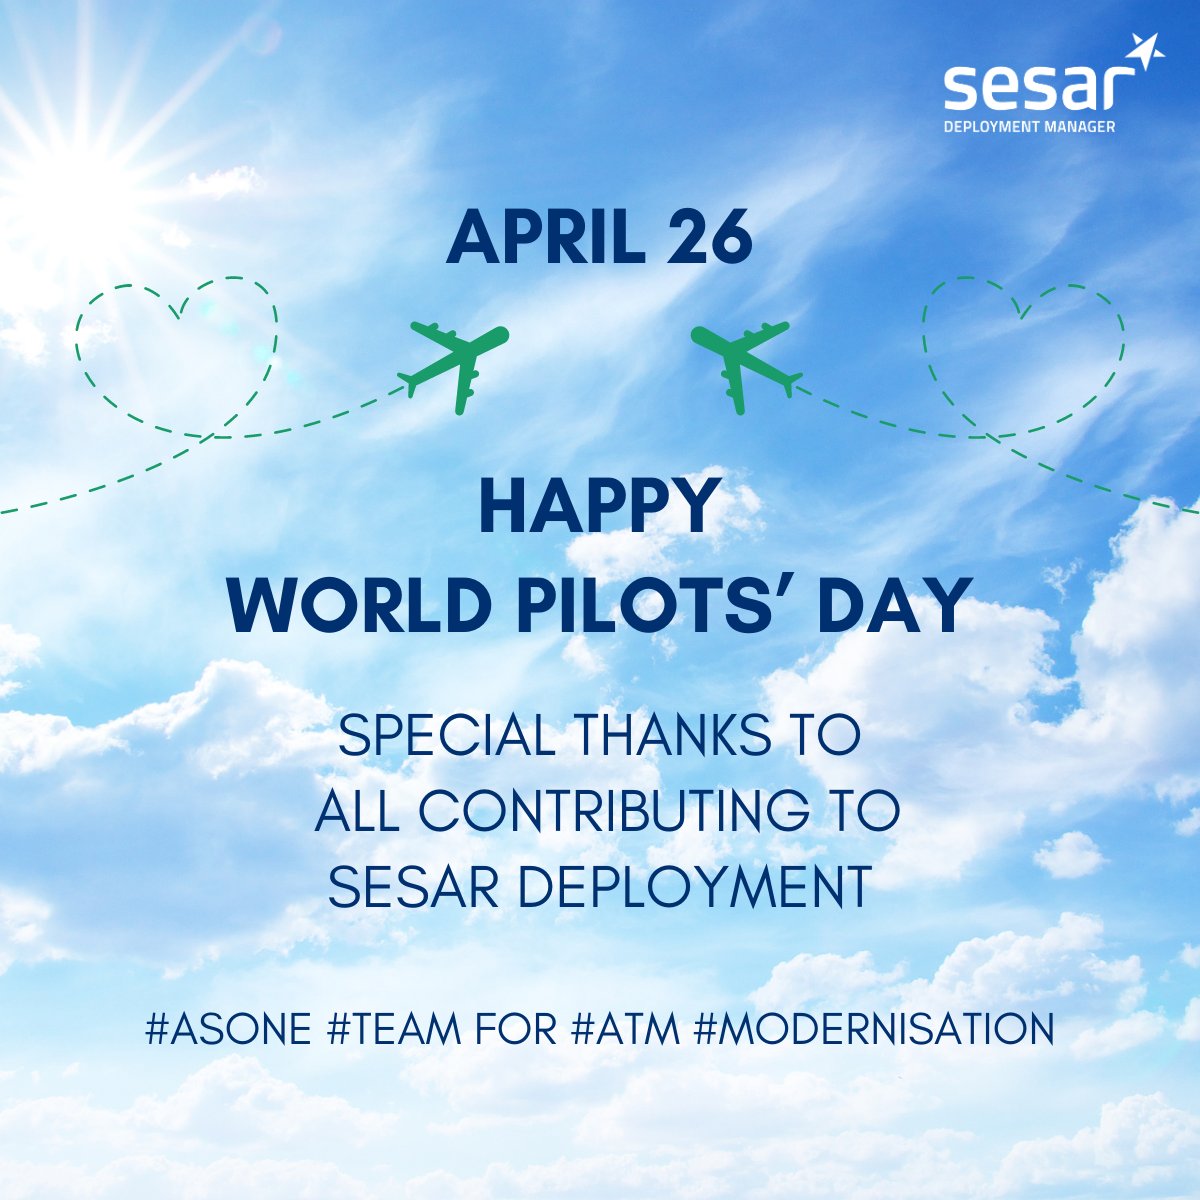 🙏to all #civil #military #pilots in #EU & around the world. Not only because they fly us safely to our destination or watch over the airspace, but also because their insights, feedback & experience helps us to build a #stronger #modern #ATM #AsOne #SESAR. #WorldPilotsDay